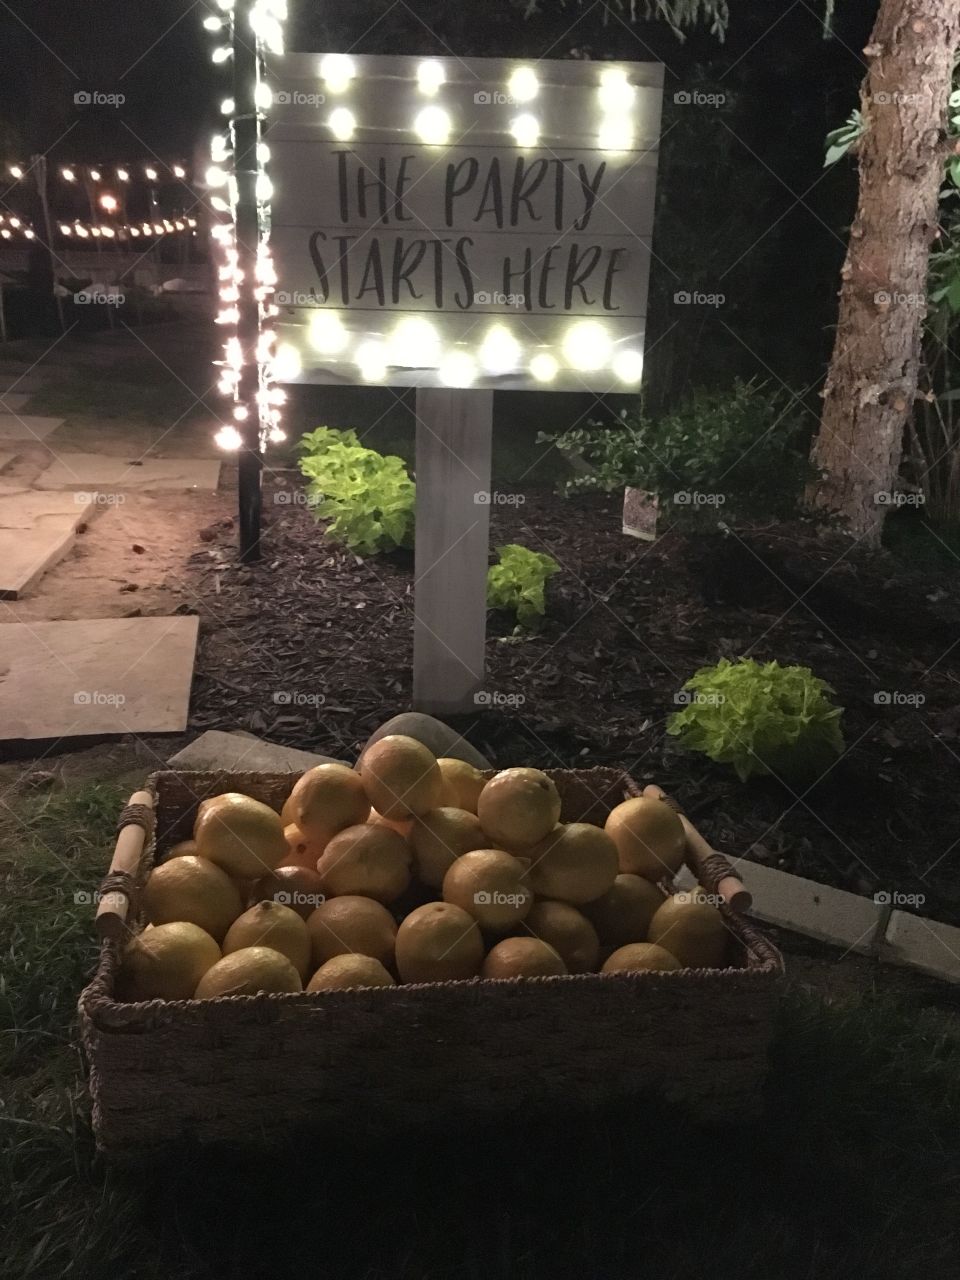 Wedding decor - lemons and party sign. Night time 